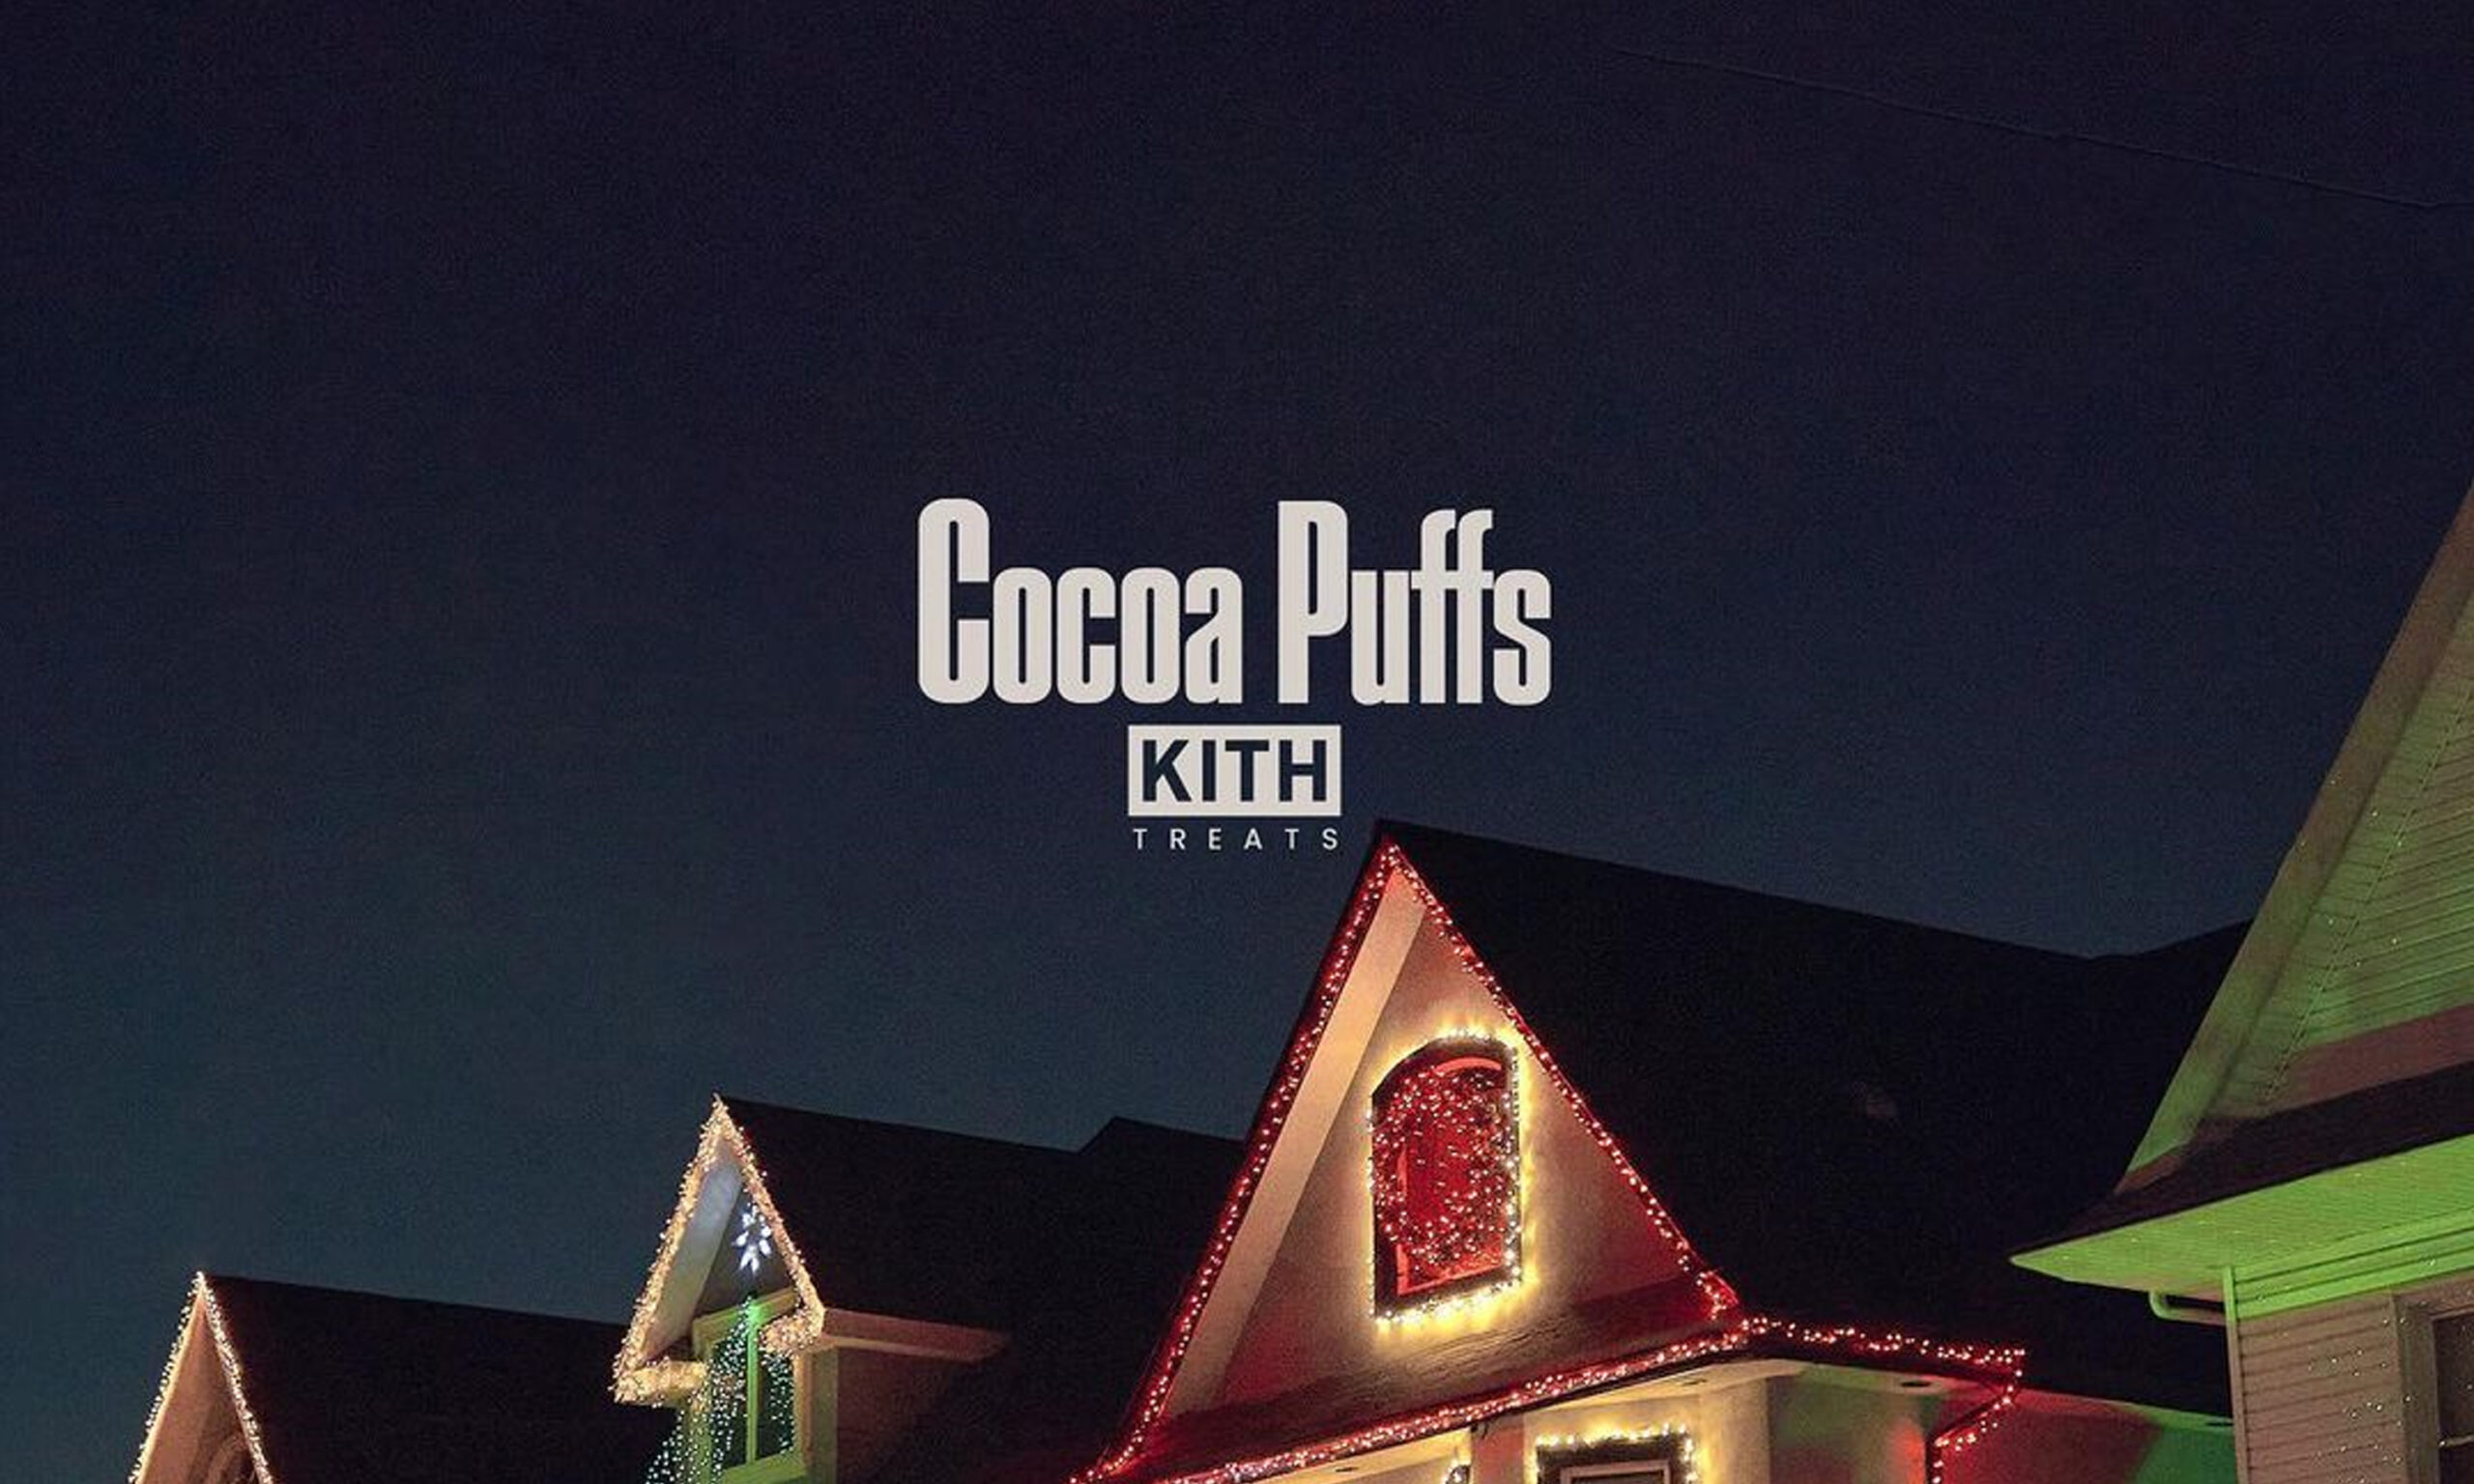 KITH Treats for Cocoa Puffs 系列发布